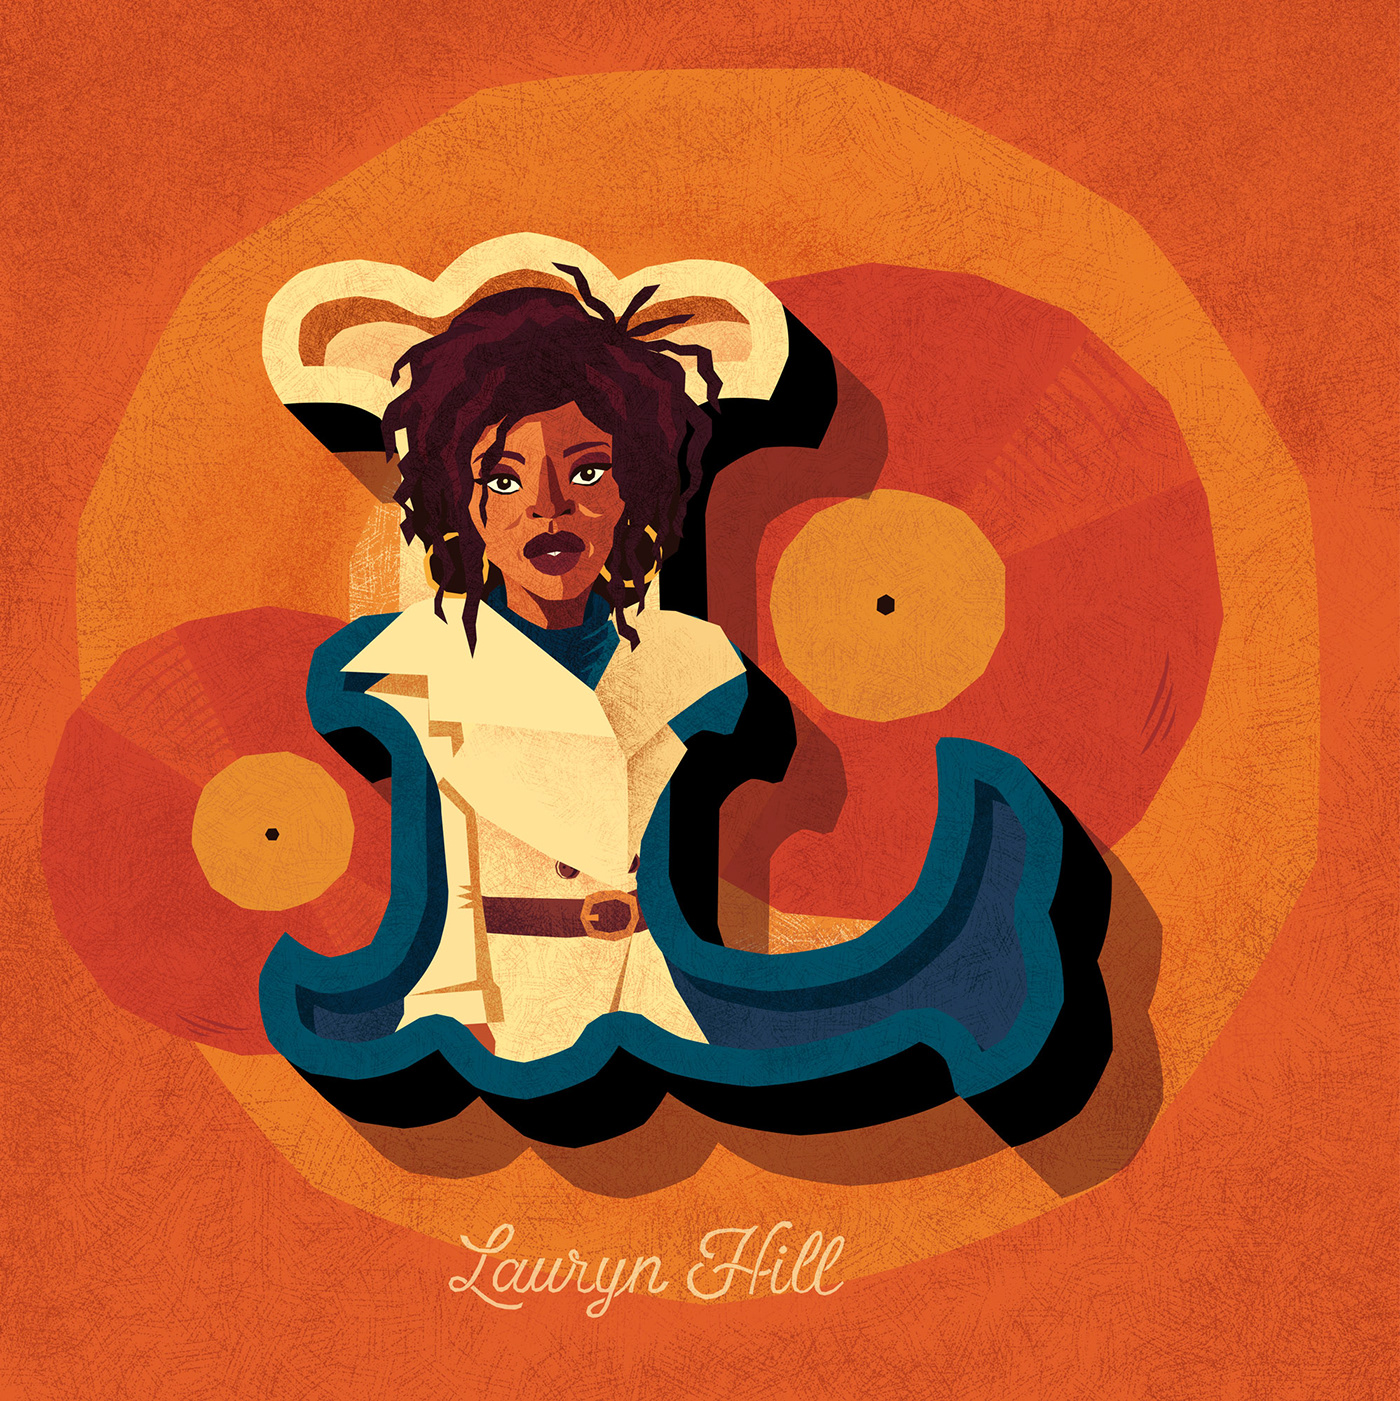 Decorative capital letter L with caricatures of singer and rapper Lauryn Hill